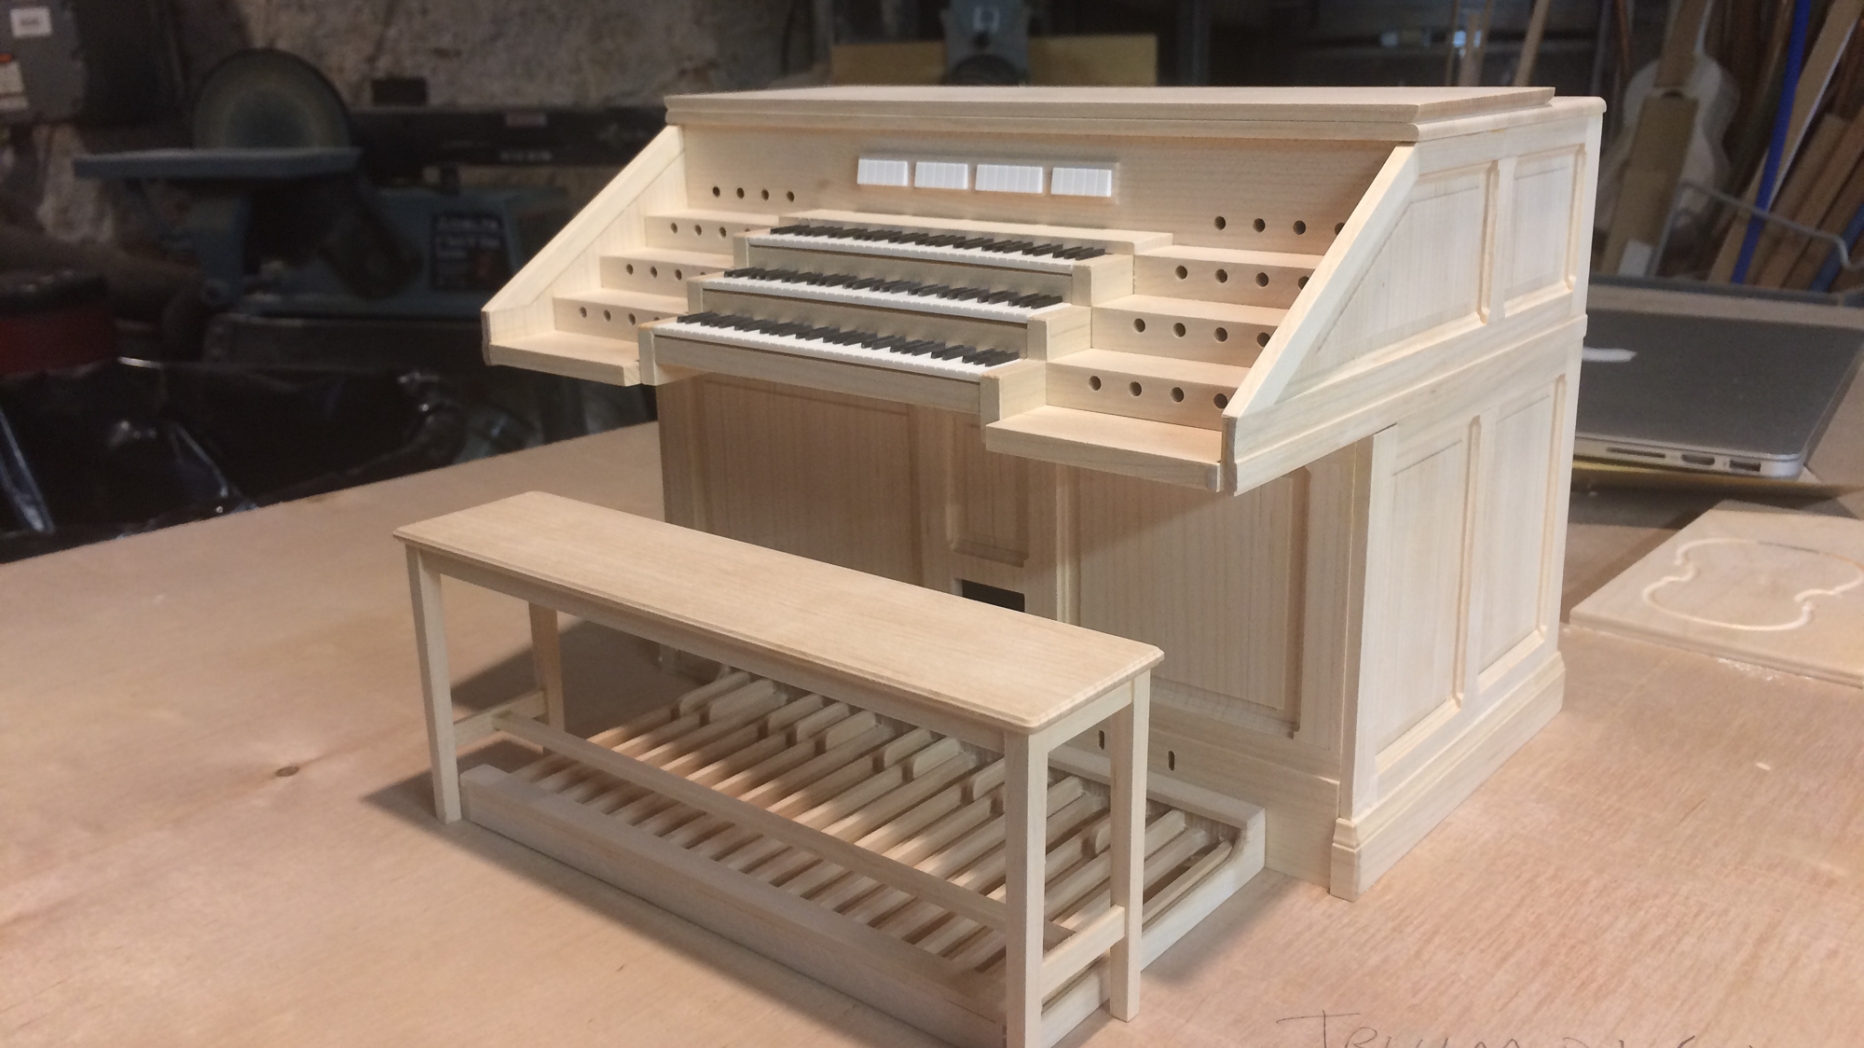 Model of the Cavaille - Coll organ console.